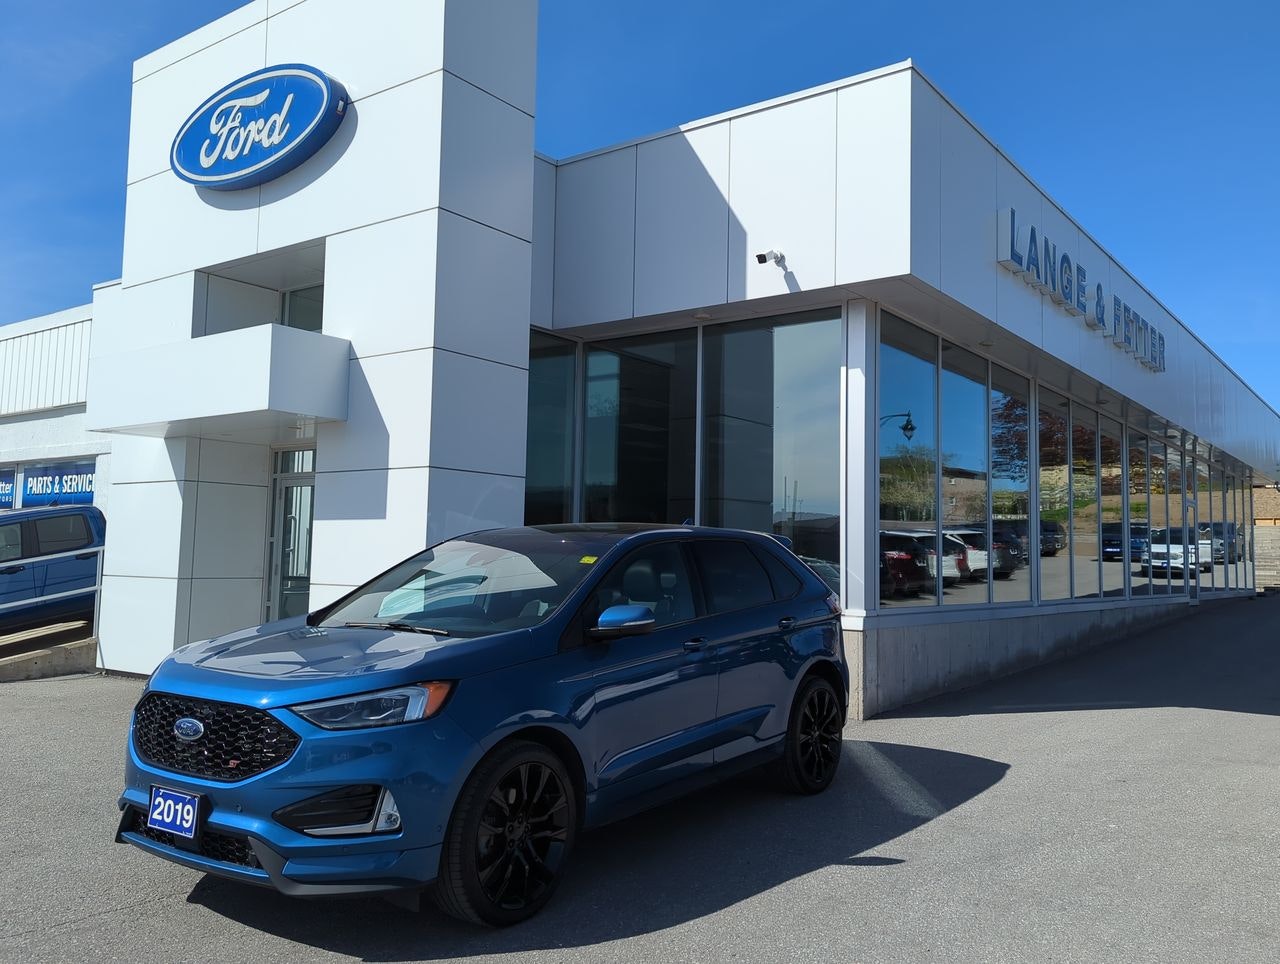 2019 Ford Edge - 21832A Full Image 1